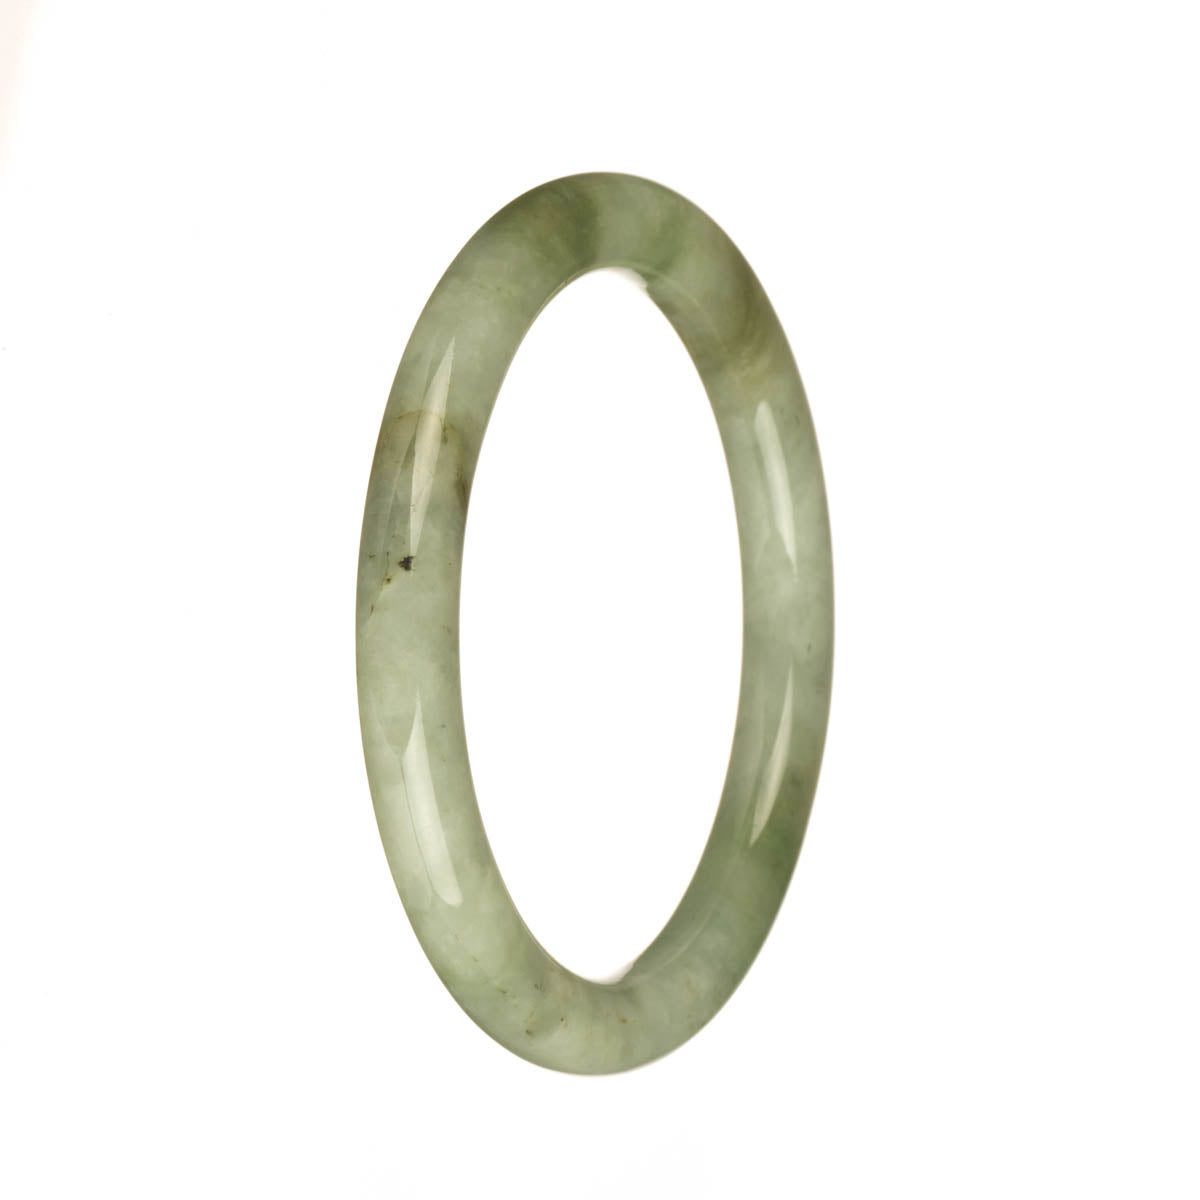 Genuine Grade A Pale Green with Apple Green and Brown Patches Jadeite Jade Bracelet - 55mm Petite Round